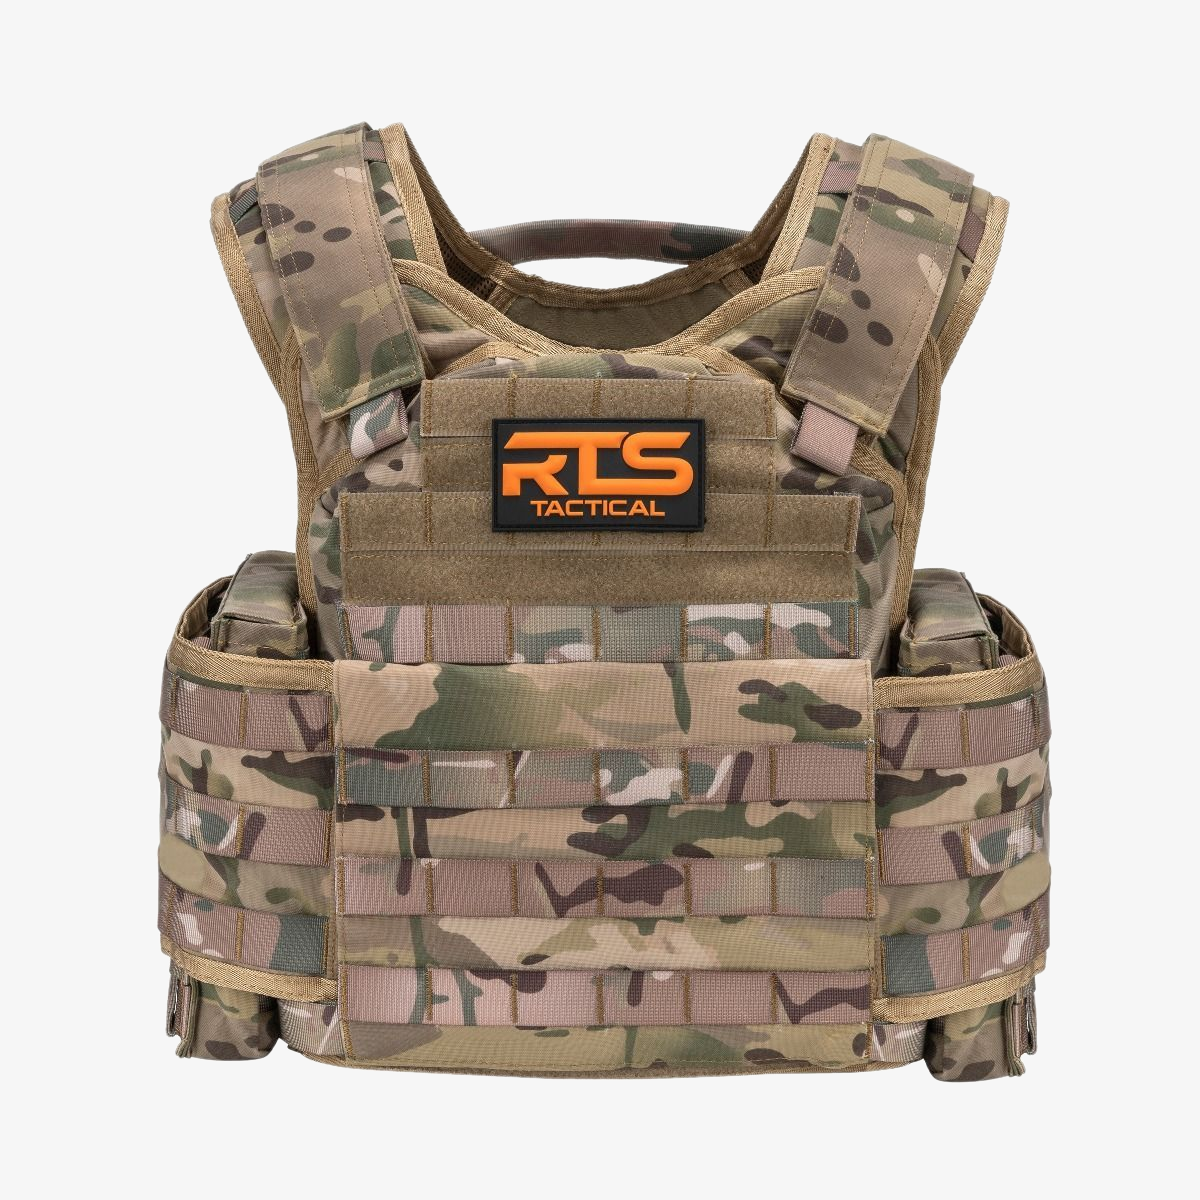 RTS Tactical Premium Plate Carrier 11X14